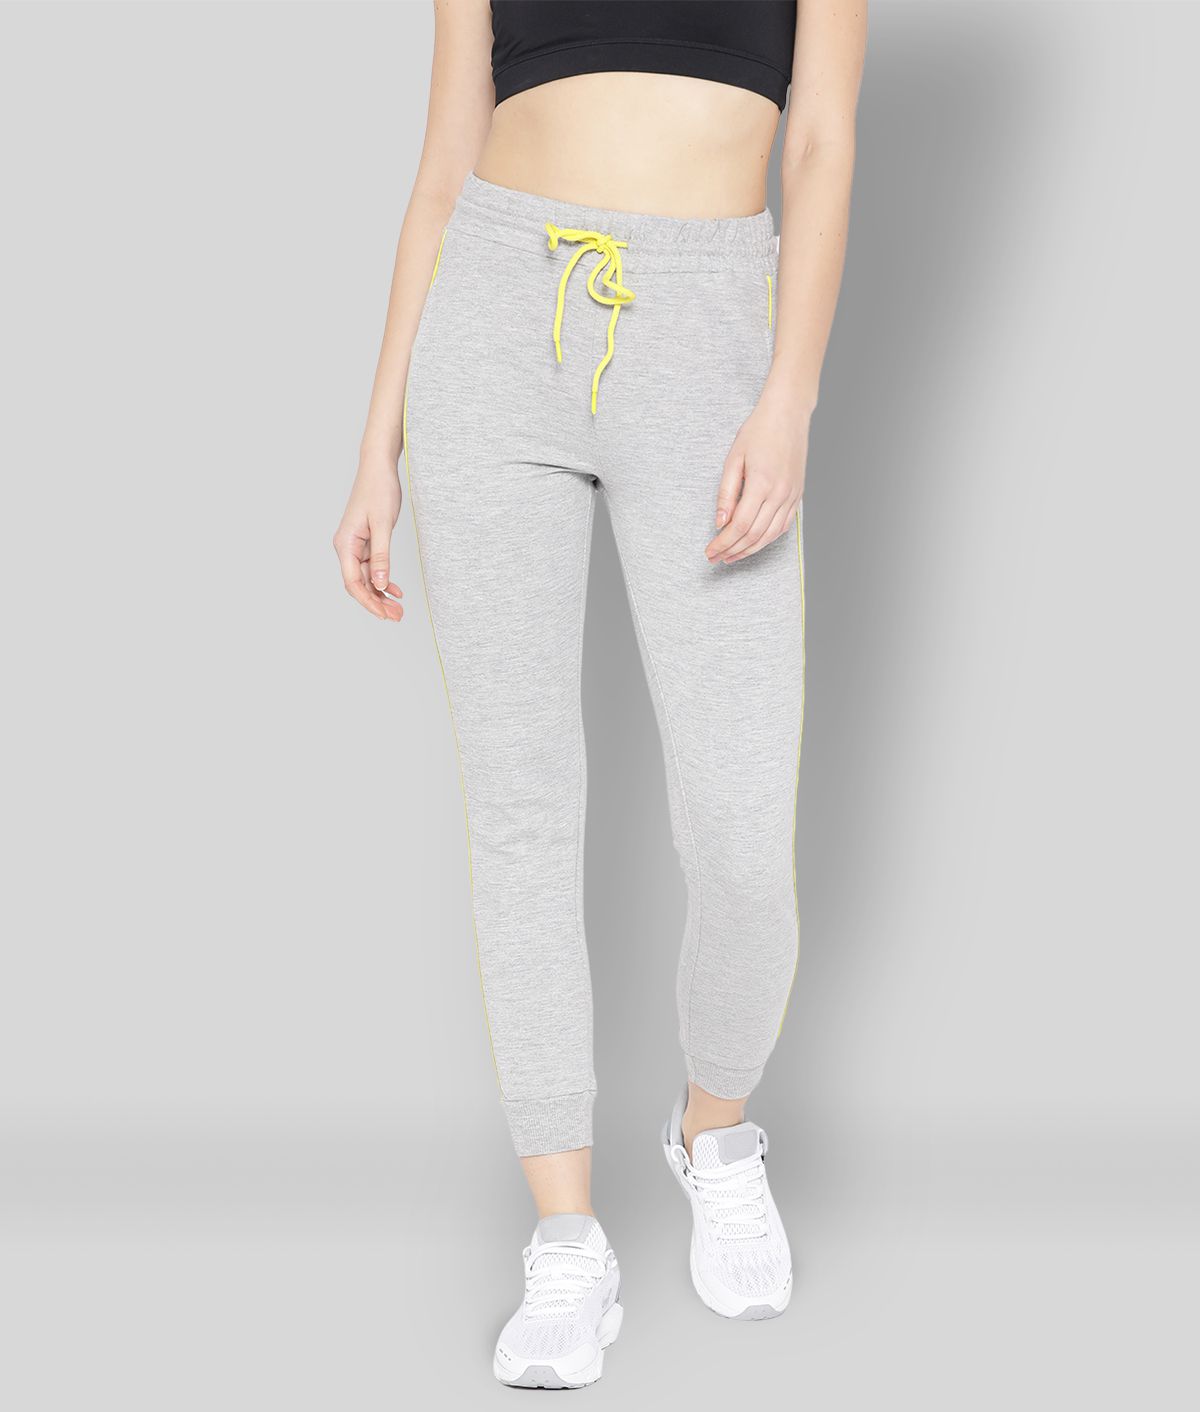     			OFF LIMITS - Light Grey Polyester Women's Running Joggers ( Pack of 1 )